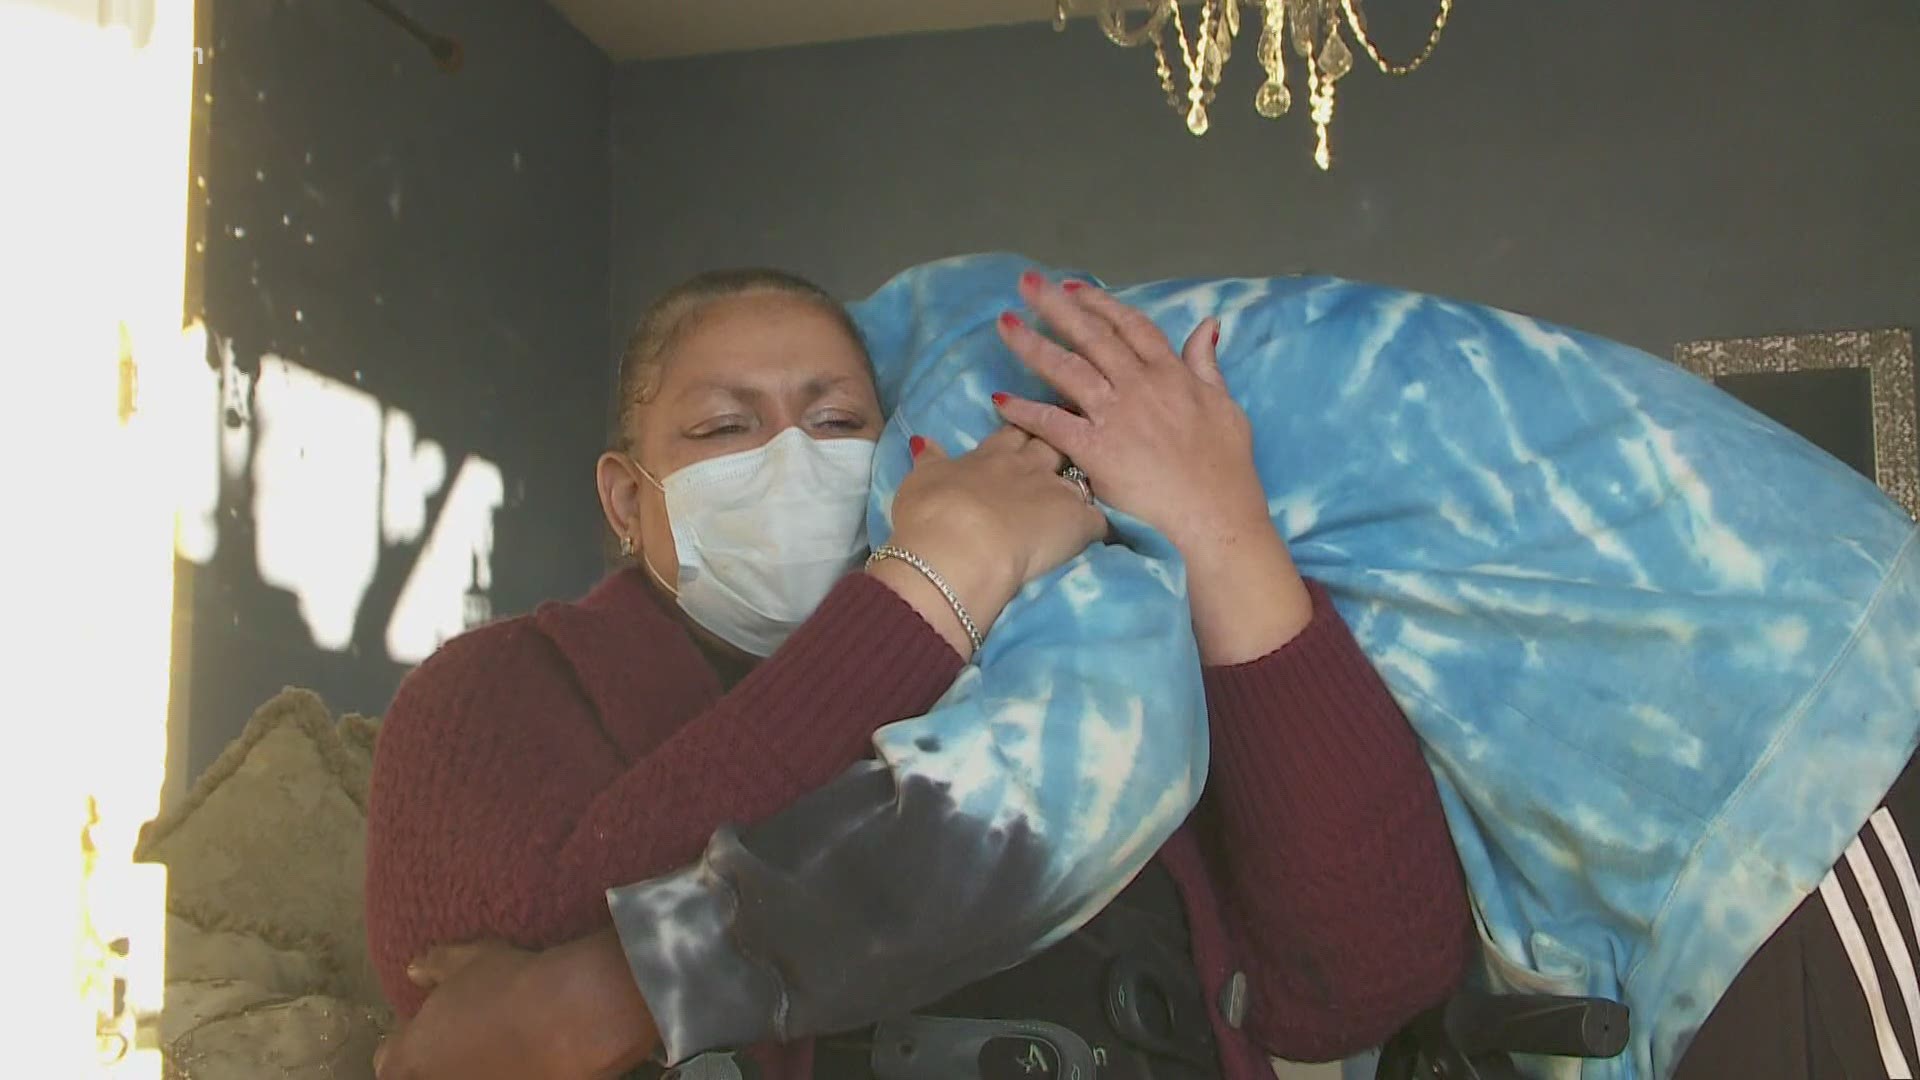 The community came together for a woman who lost her home to a fire possibly caused by fireworks on New Years Eve.